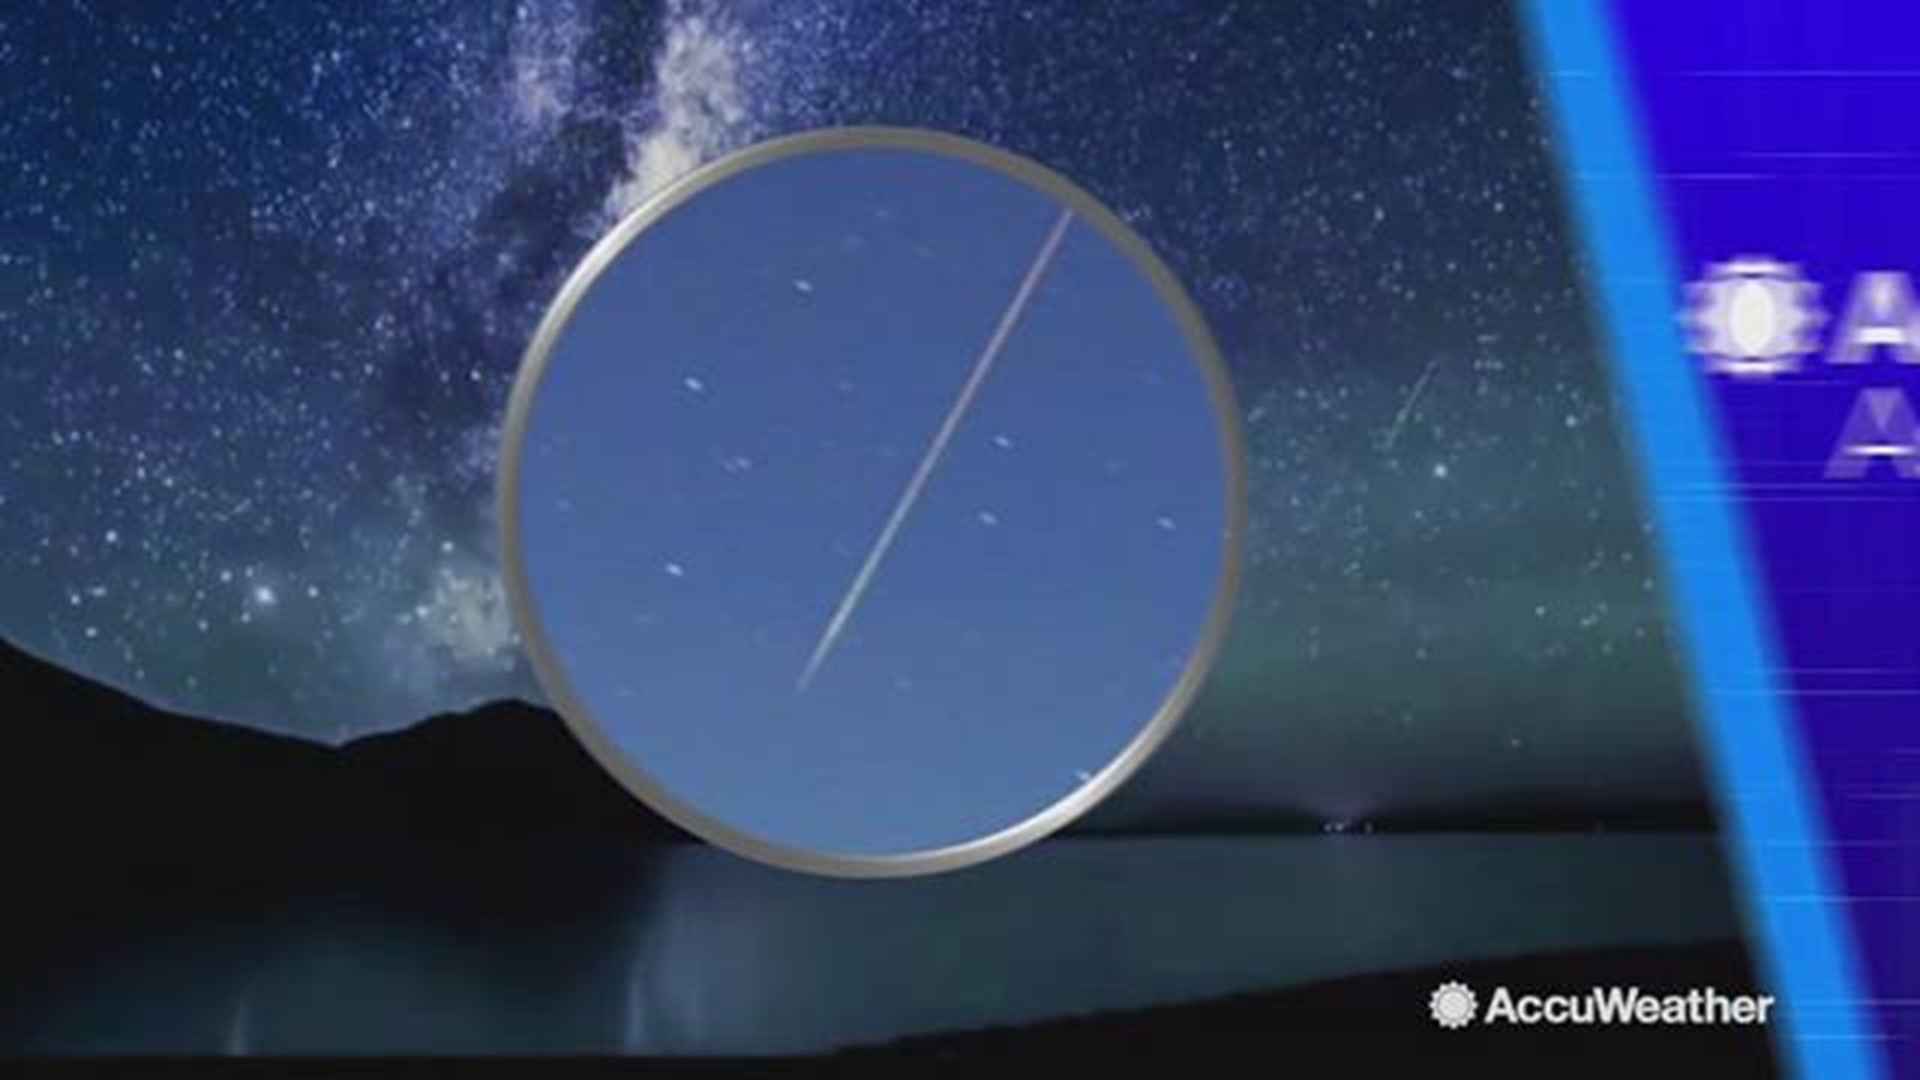 We wish you had a Happy New Year.  The night sky has a treat for you on the night of Jan. 3-4, when the Quadrantid Meteor Shower peaks.  The shower is brief so prepare accordingly.